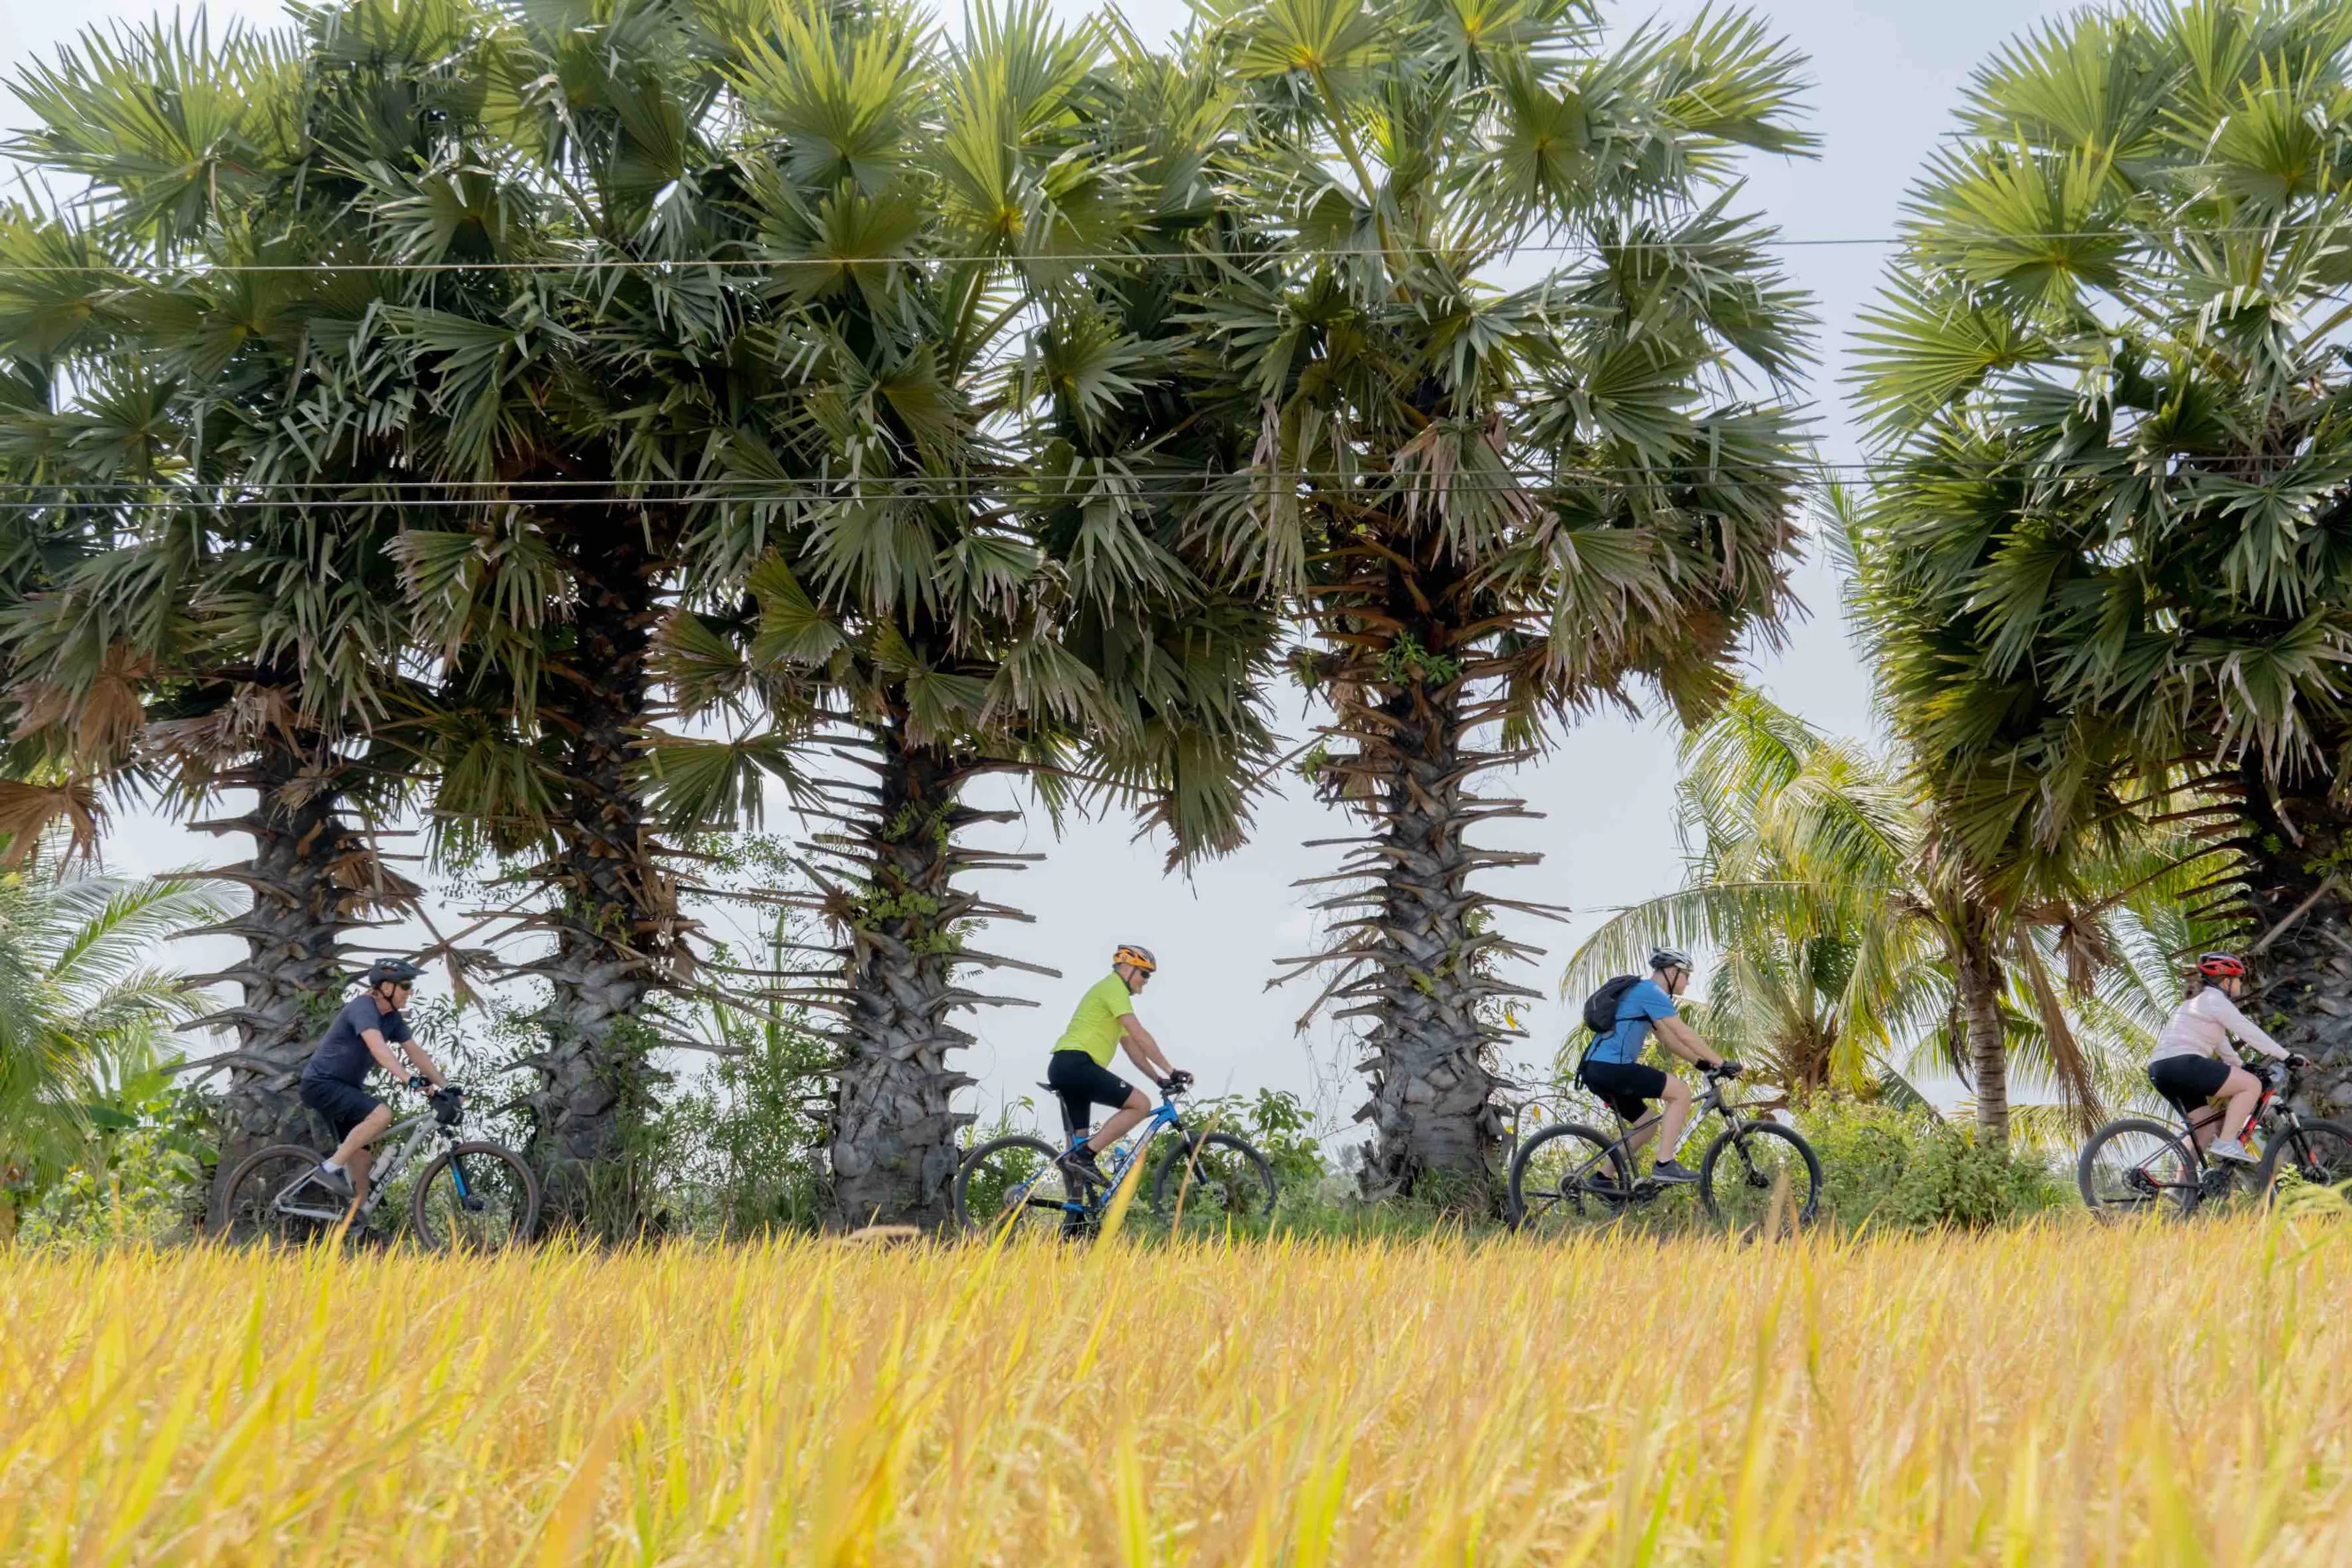 Rice Paddies Is What Makes Mekong Delta Very Astonishing To The World And Cyclists, Mr Biker Saigon